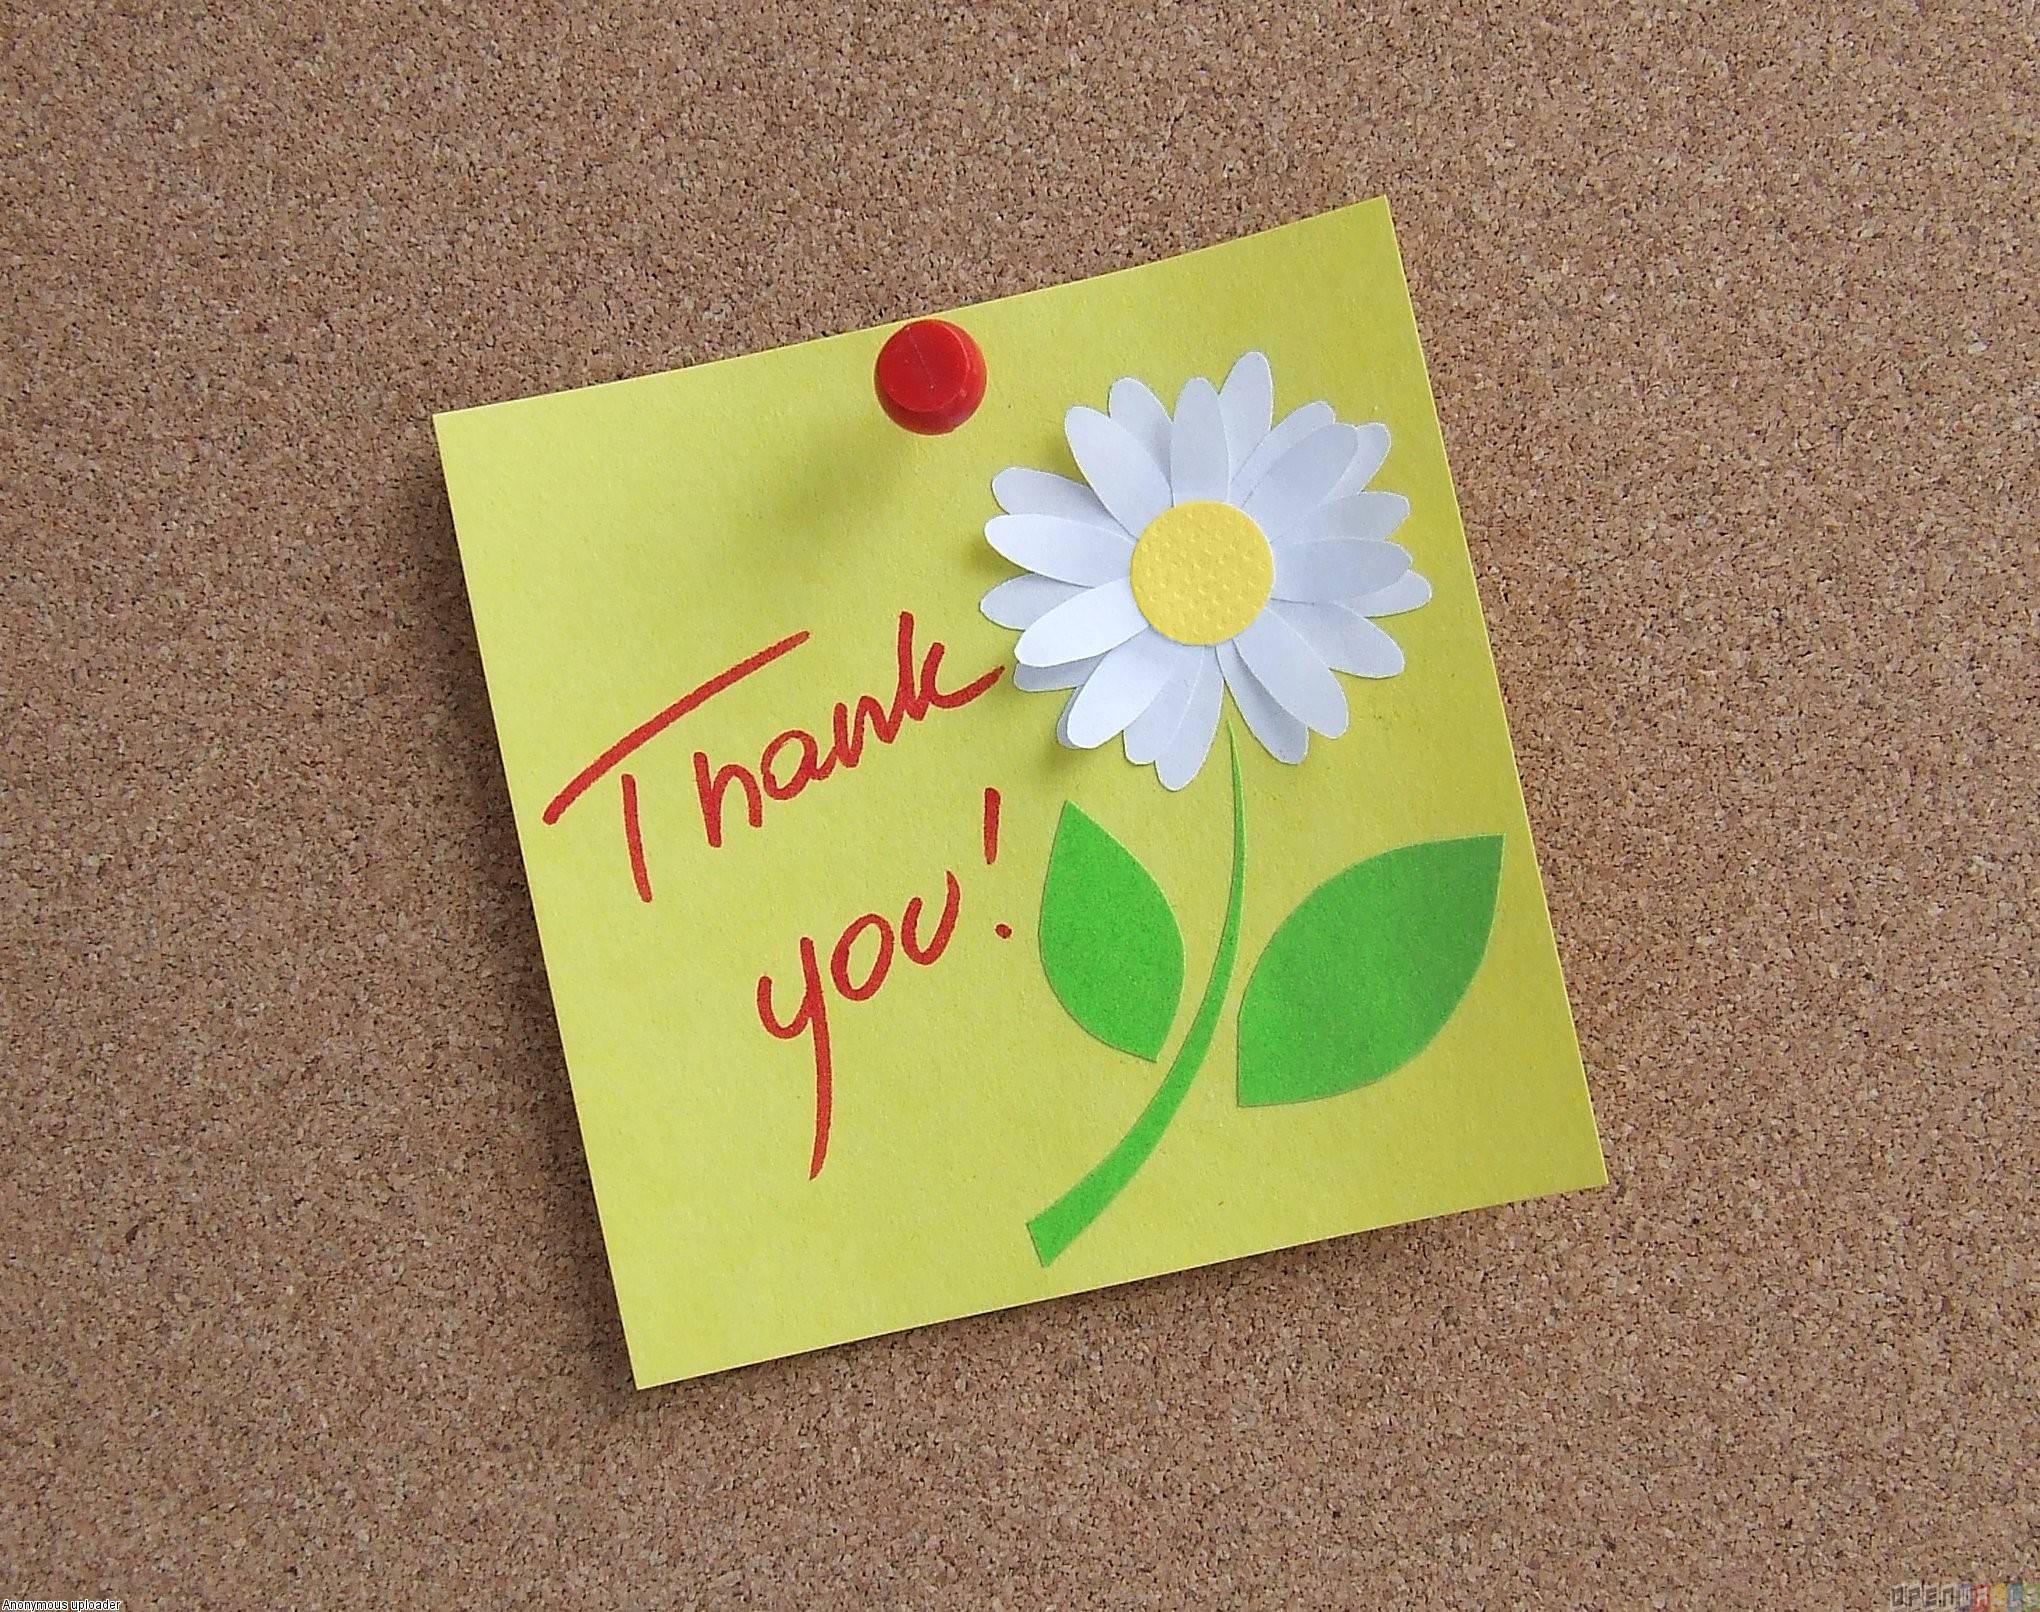 Thank You Notes Free HD Wallpaper